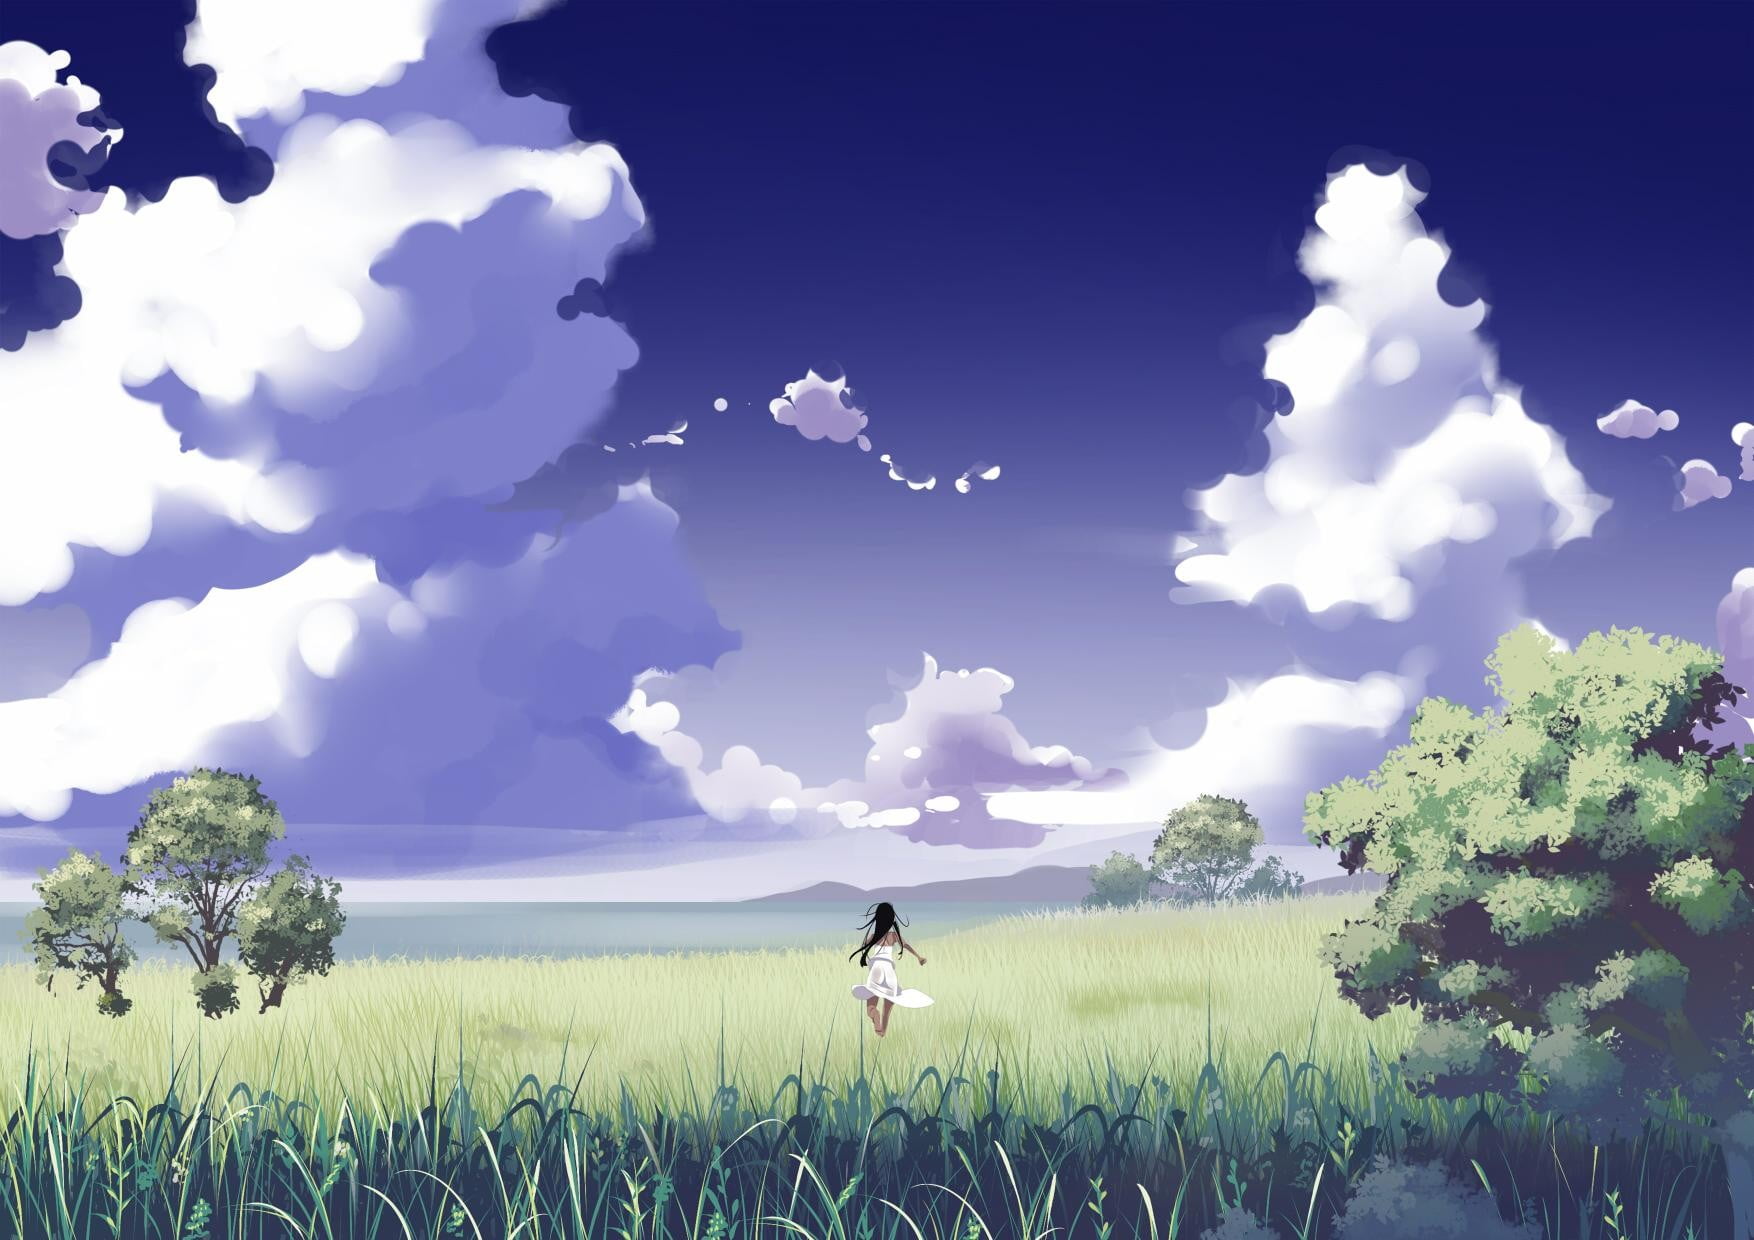 female anime character in the middle of open field, landscape